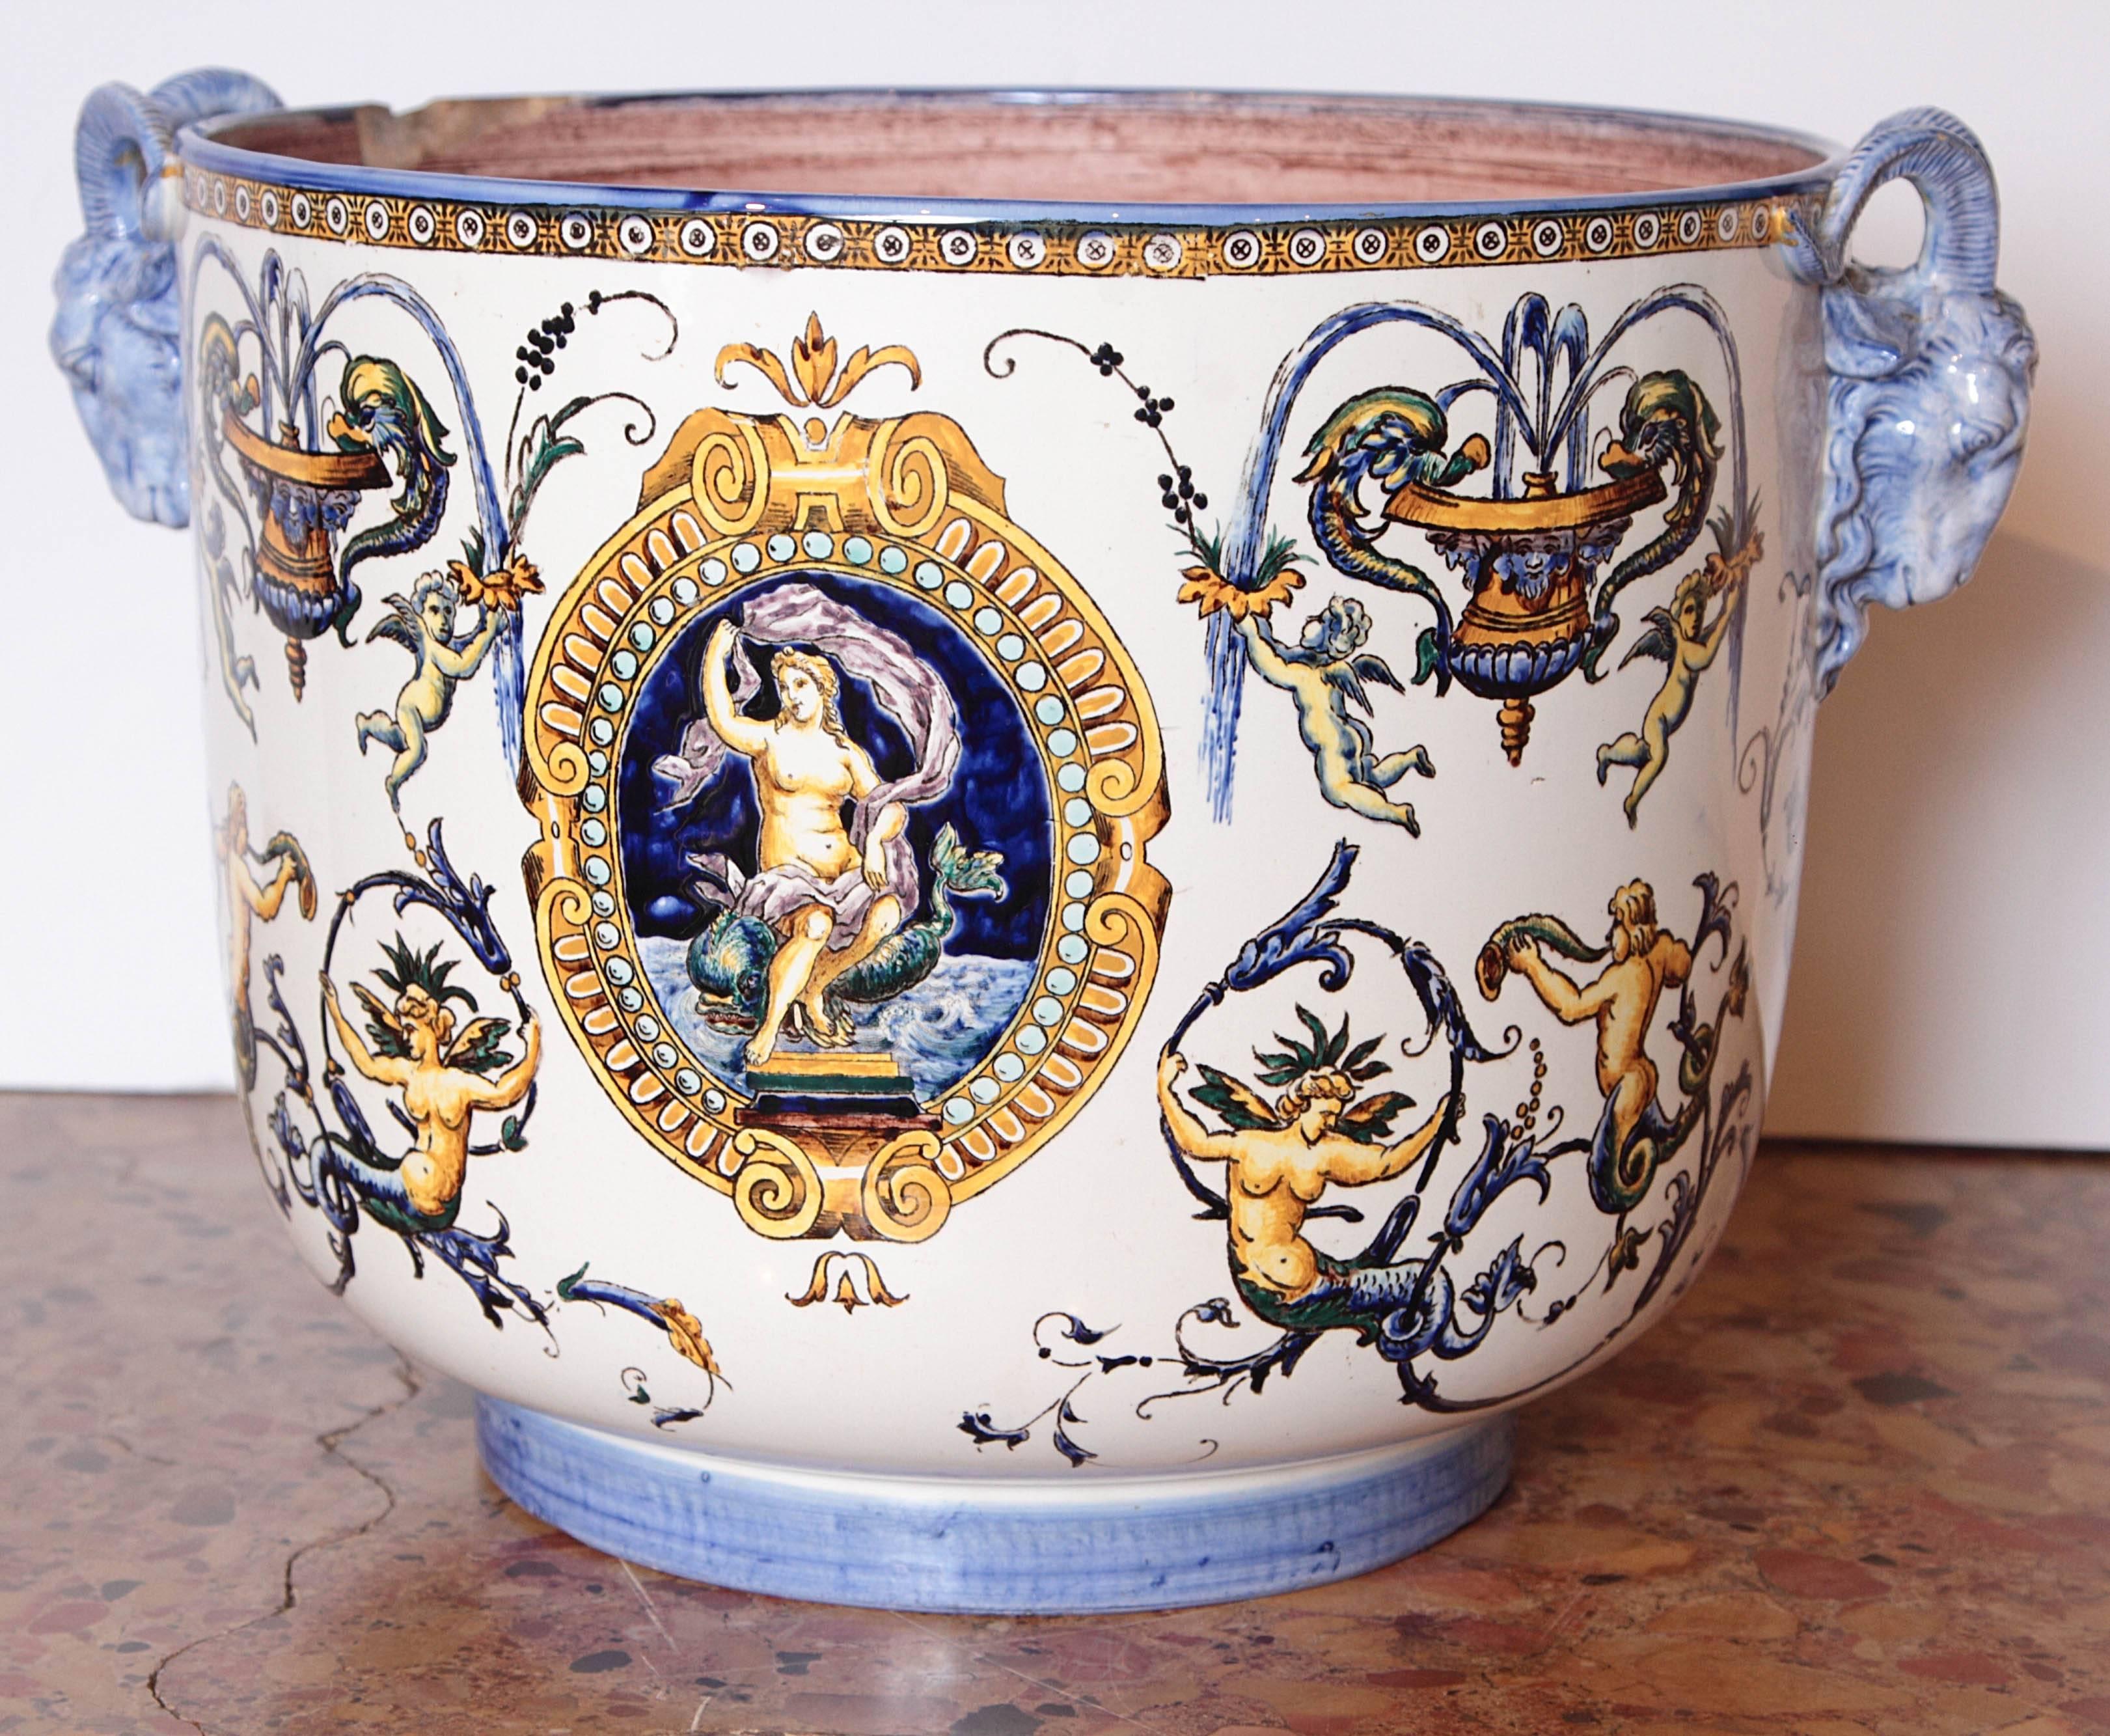 This antique French faience Jardiniere by Gien has the white ground color of a pattern called Renaissance, manufactured during the time period of 1860-1871. Faience is tin glazed earthenware that allows pigments to be applied in numerous